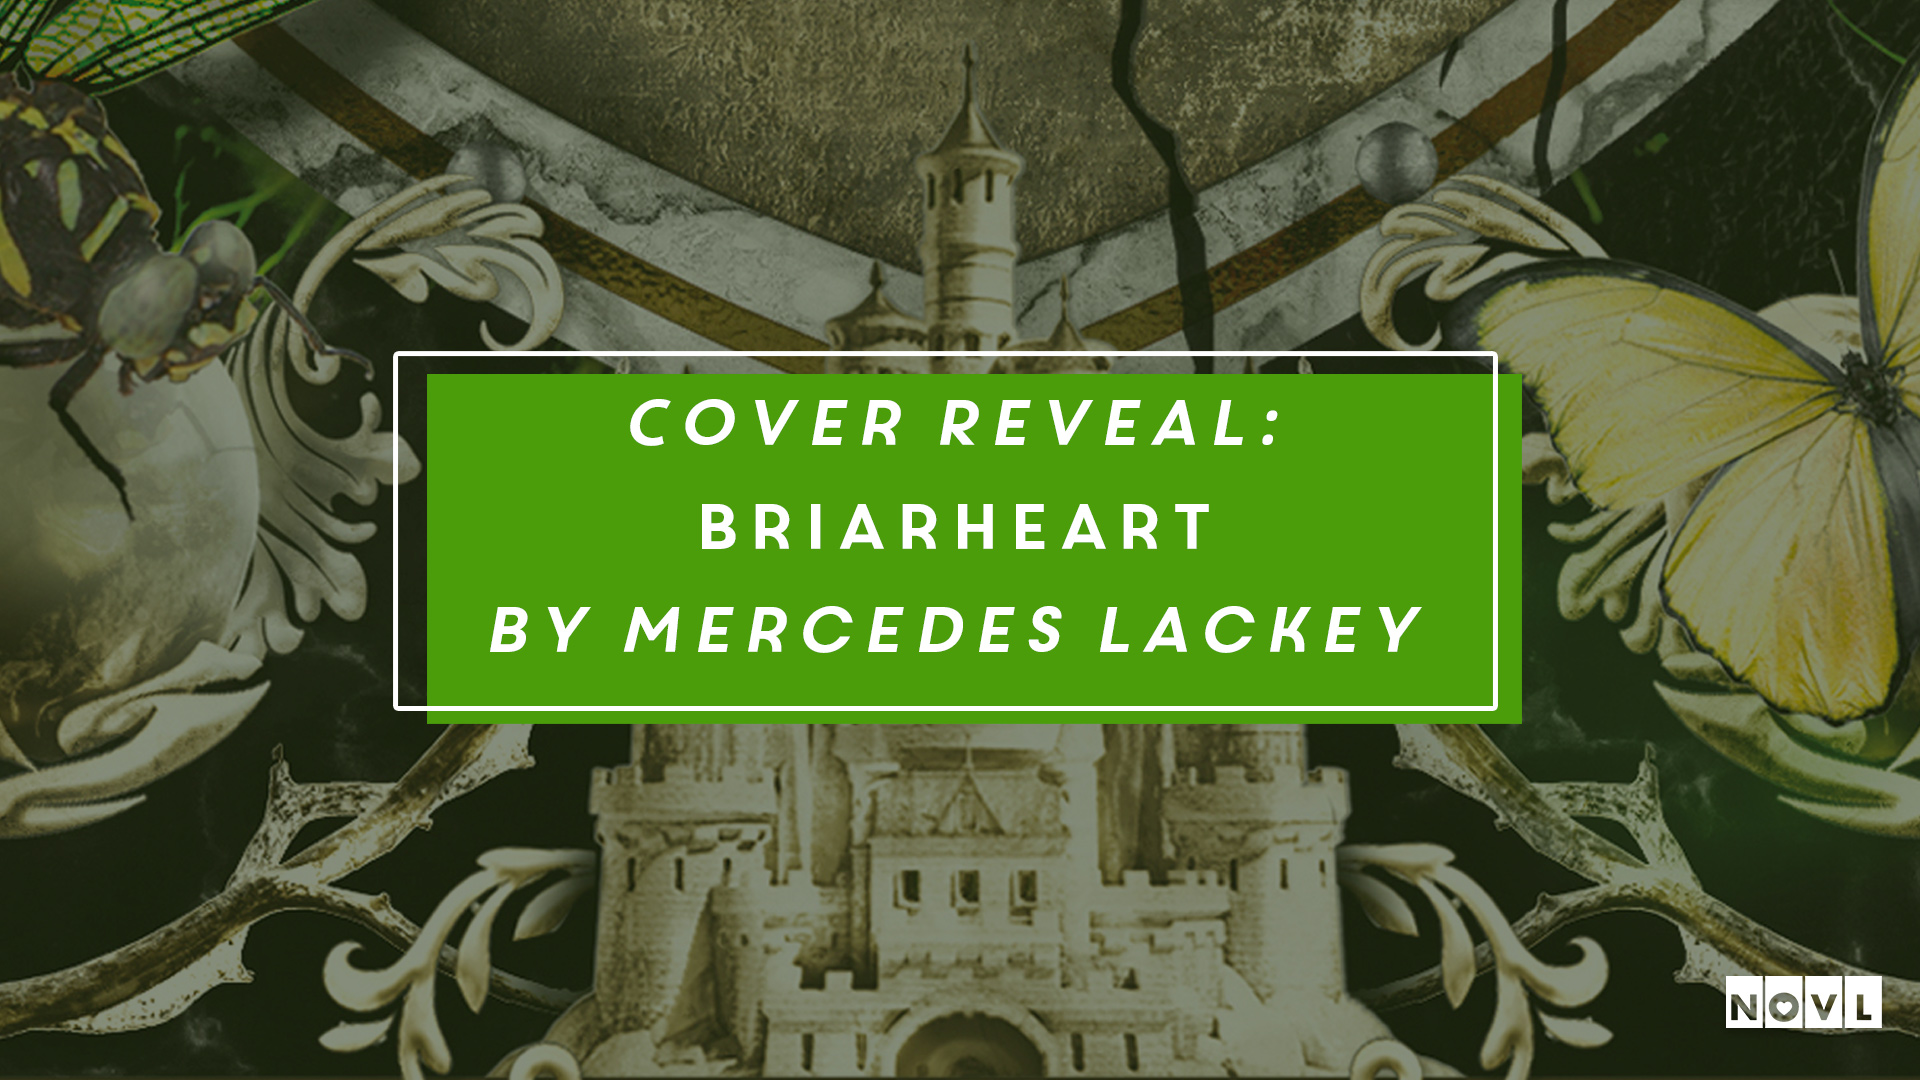 The NOVL Blog, Featured Image for Article: Cover Reveal: Briarheart by Mercedes Lackey